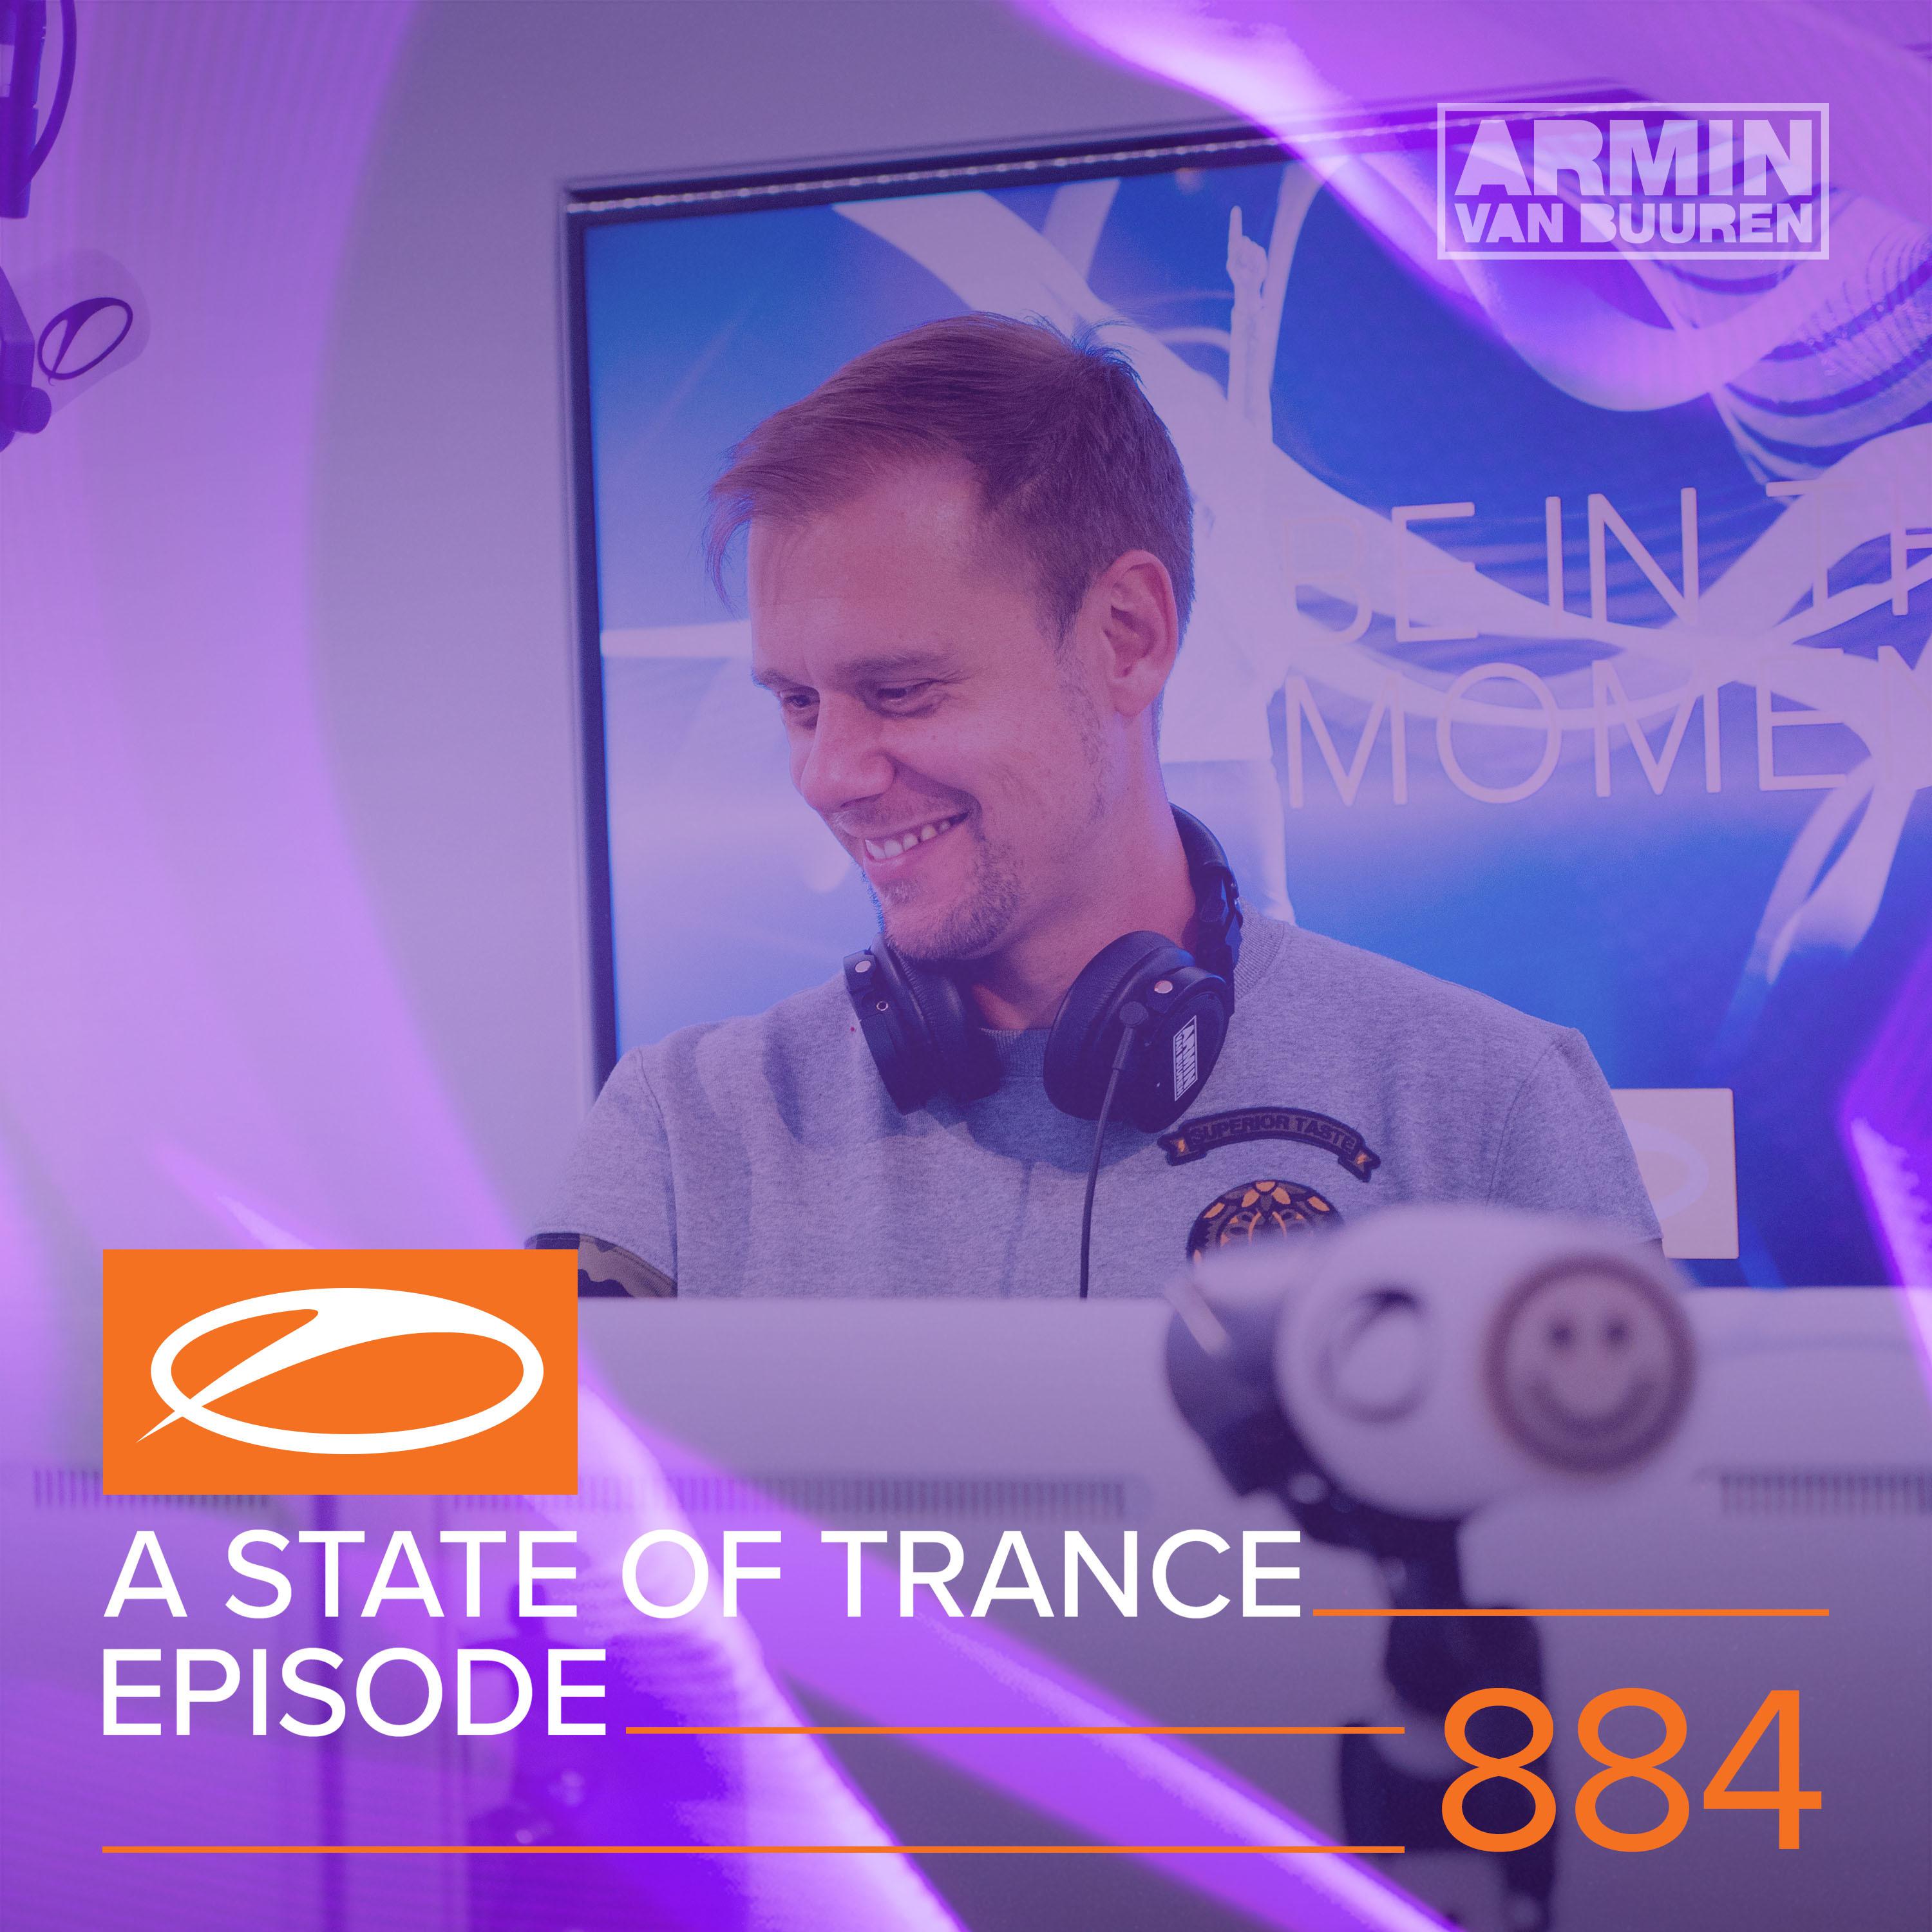 A State Of Trance (ASOT 884) (Coming Up, Pt. 1)